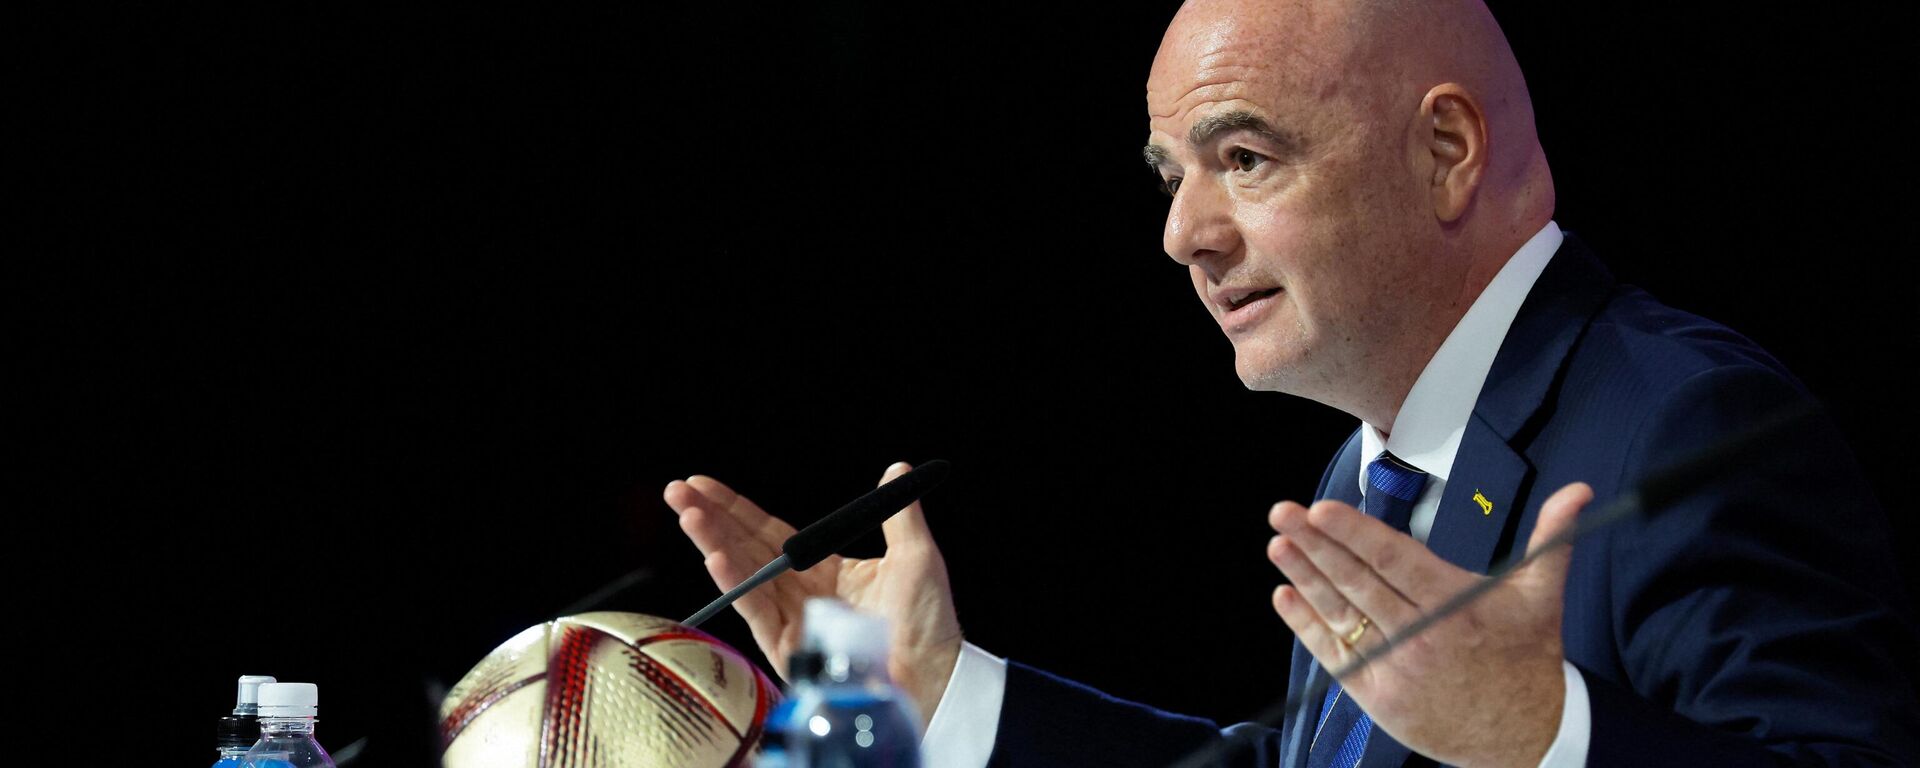 FIFA President Gianni Infantino gives a press conference Qatar National Convention Center (QNCC) in Doha on December 16, 2022, during the Qatar 2022 World Cup football tournament. - Sputnik International, 1920, 17.12.2022